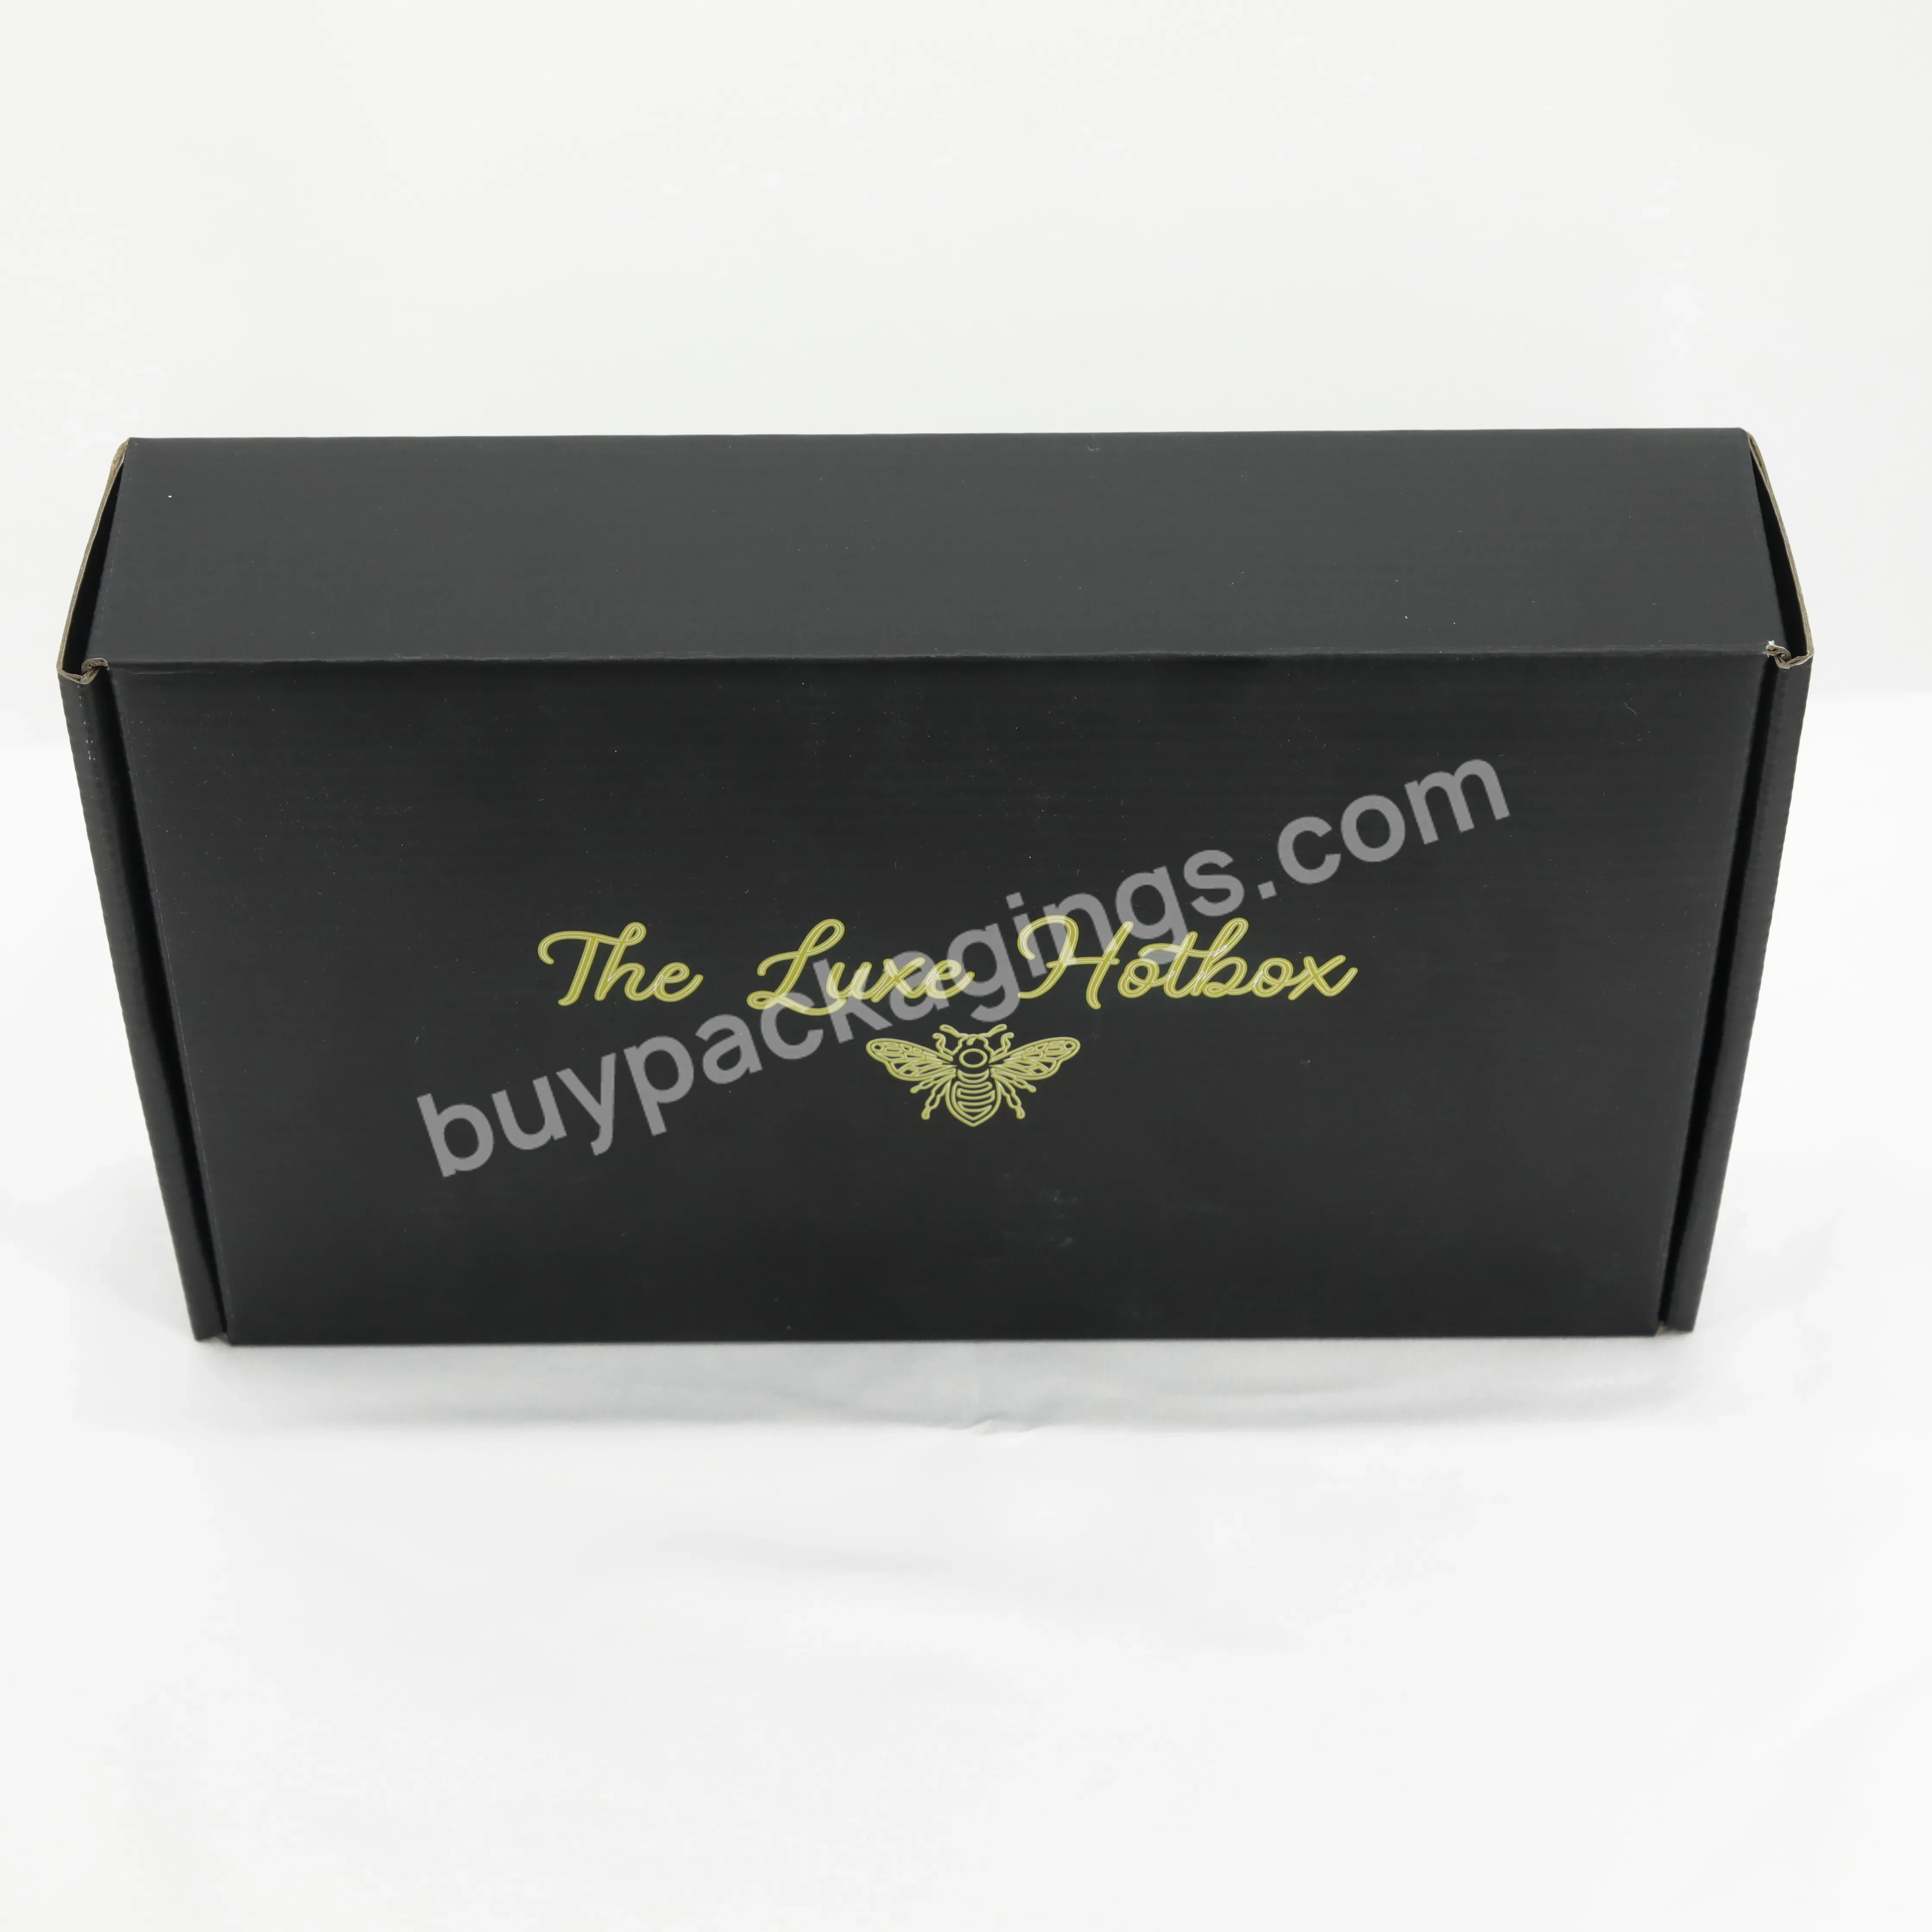 Shanghai Manufacture Customized Colored Corrugated Boxes With Custom Logo Printed,Durable Apparel Packaging Boxes For Cloth - Buy Tshirt Box T-shirt Packaging,Packaging Boxs For Tshirts,Clothes Packaging Custom Box Tshirt.